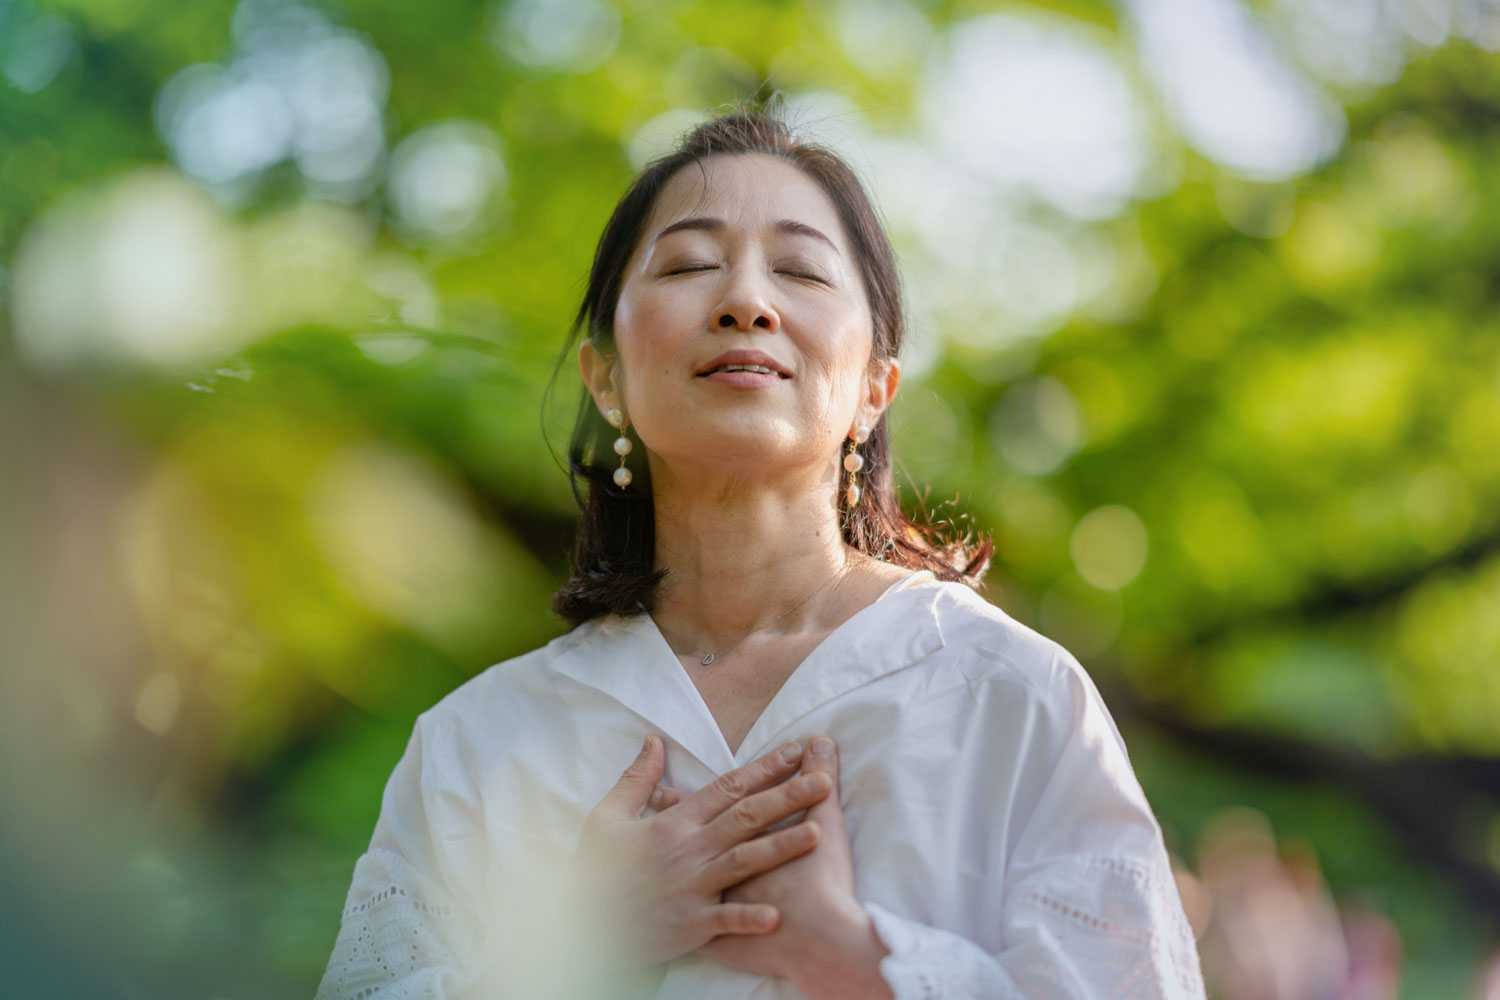 Woman breathing deeply outside in nature